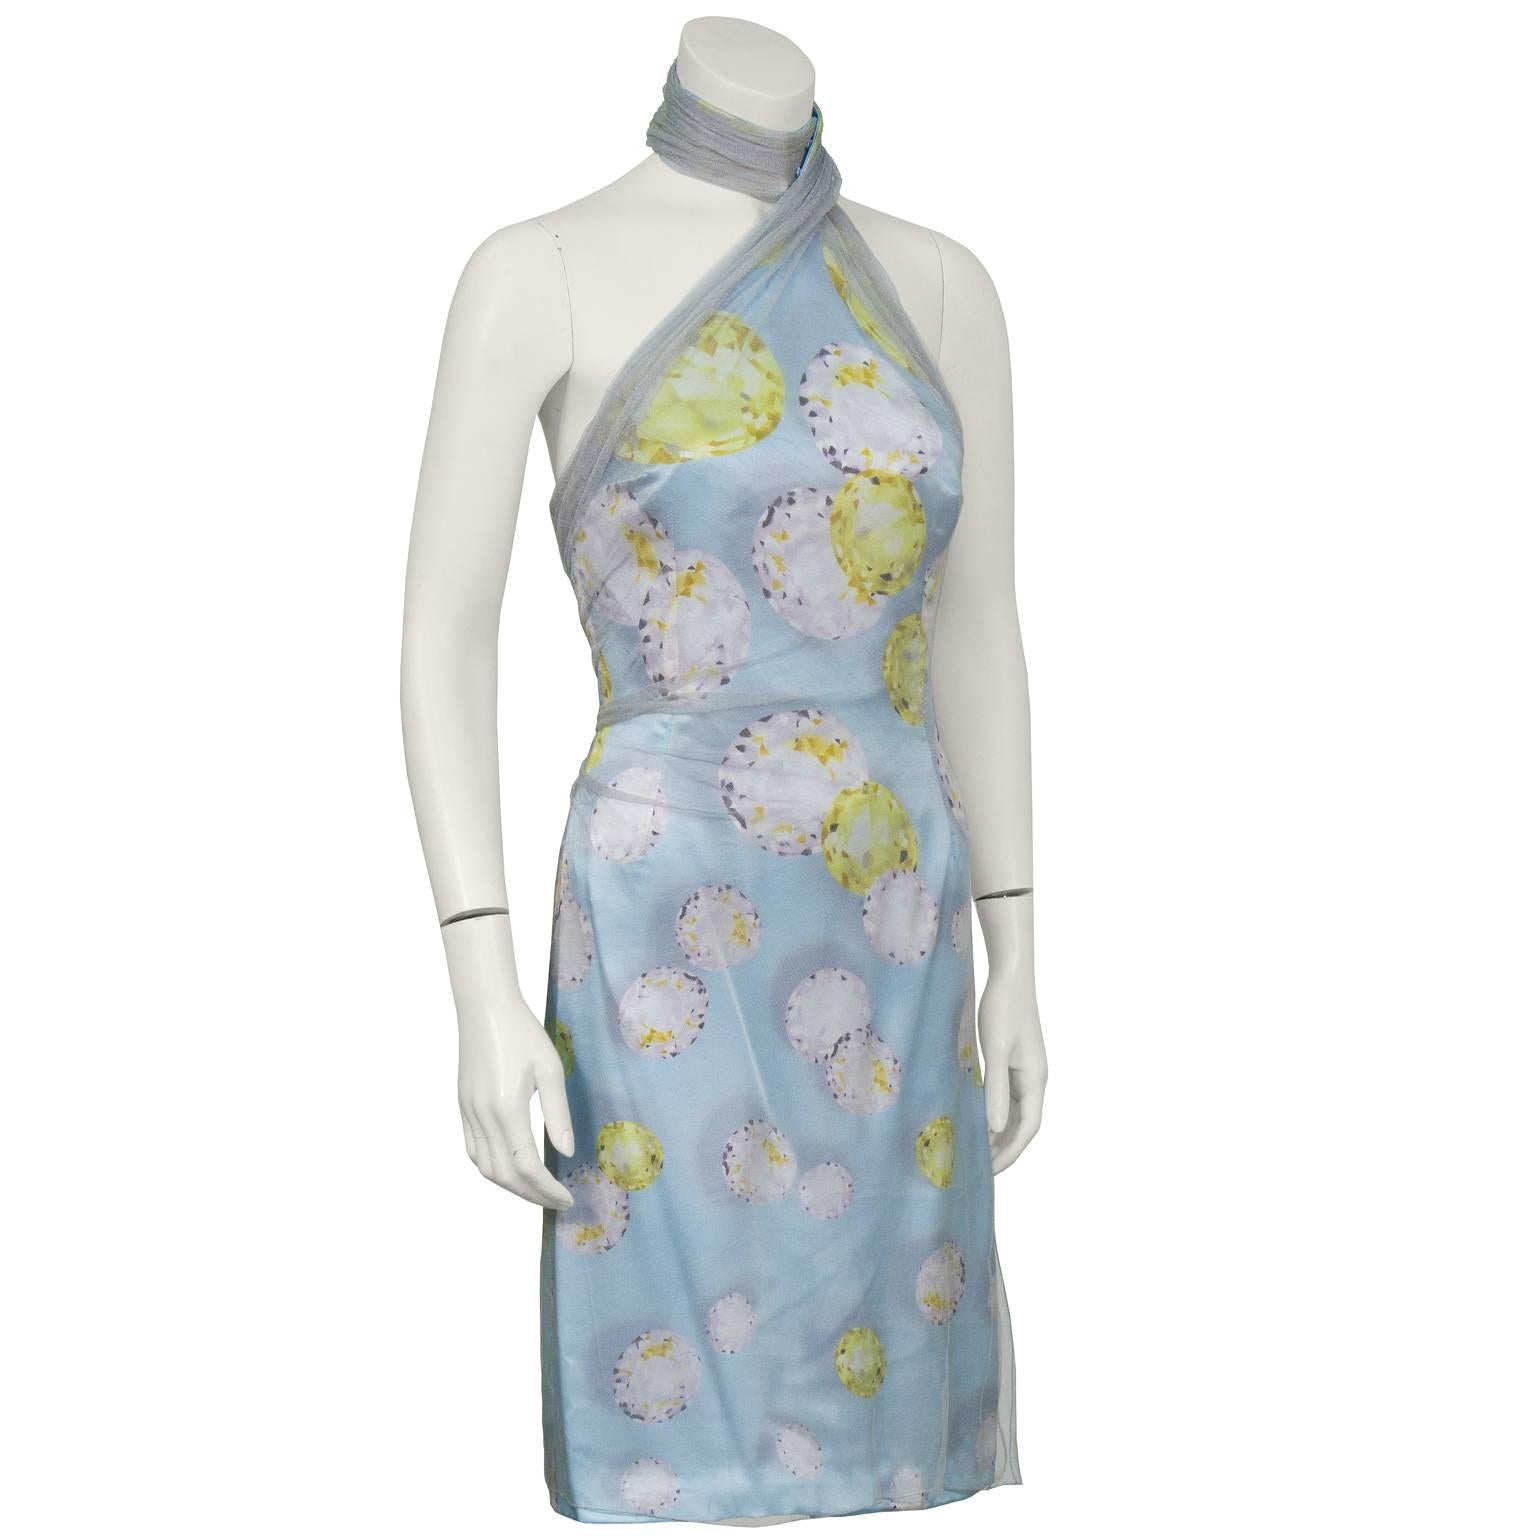 Unusual halter style jewel print dress by Gianni Versace with a dove grey net over layer. The halter fastens at the front of the neck, creating a choker style look, with 4 snap buttons. The net layer is gathers along the bust and across the back.